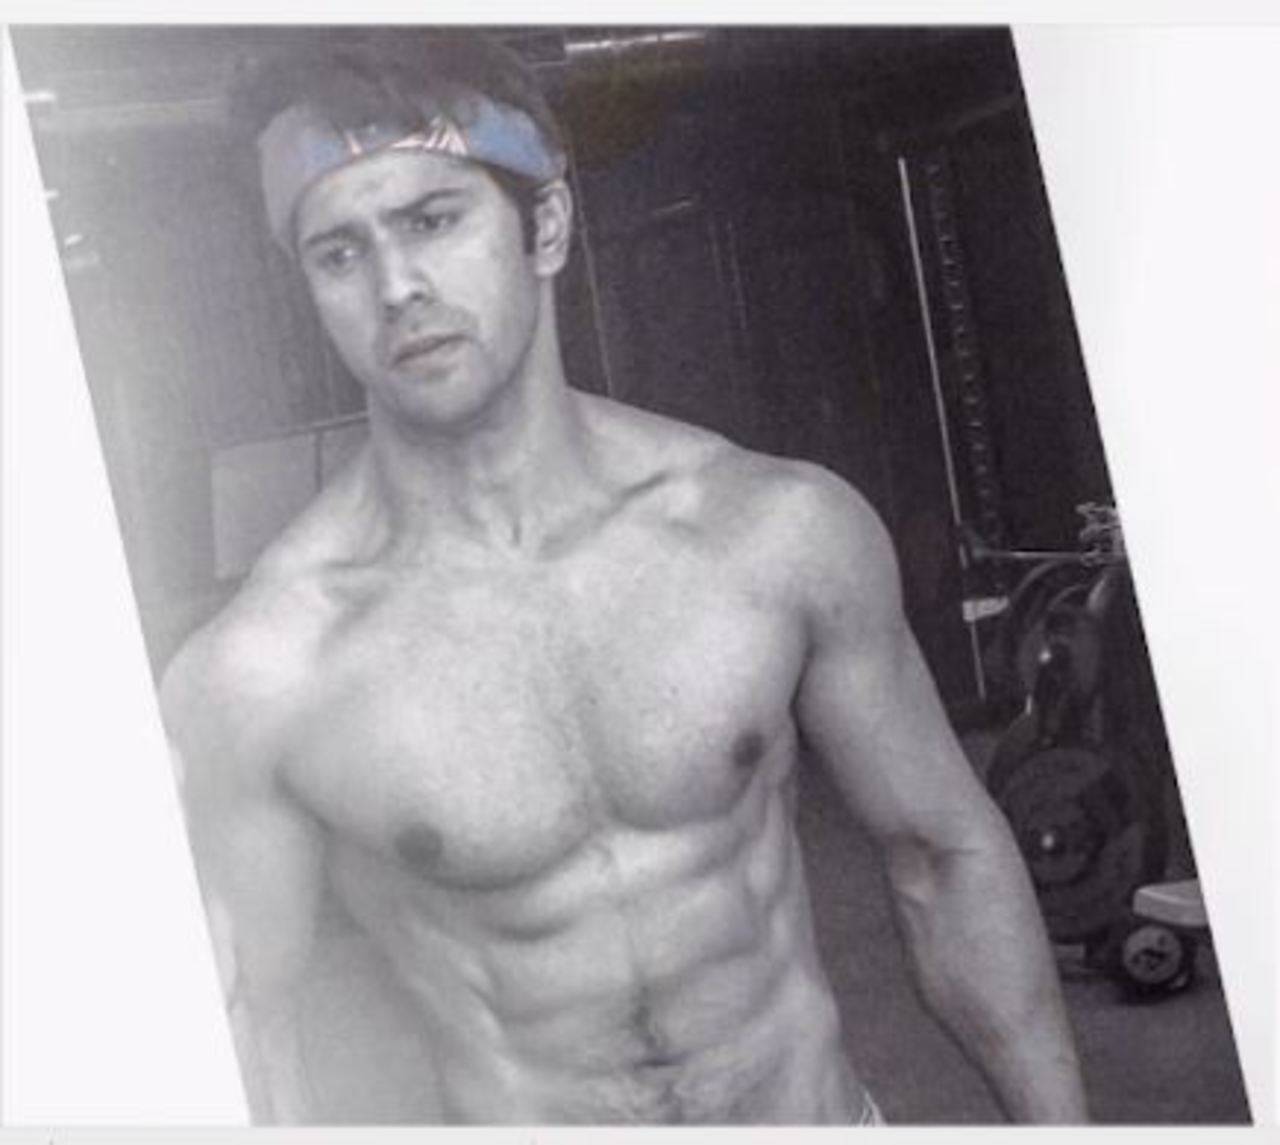 Varun Dhawan flaunts his ripped 8-pack abs in 'ABCD 2